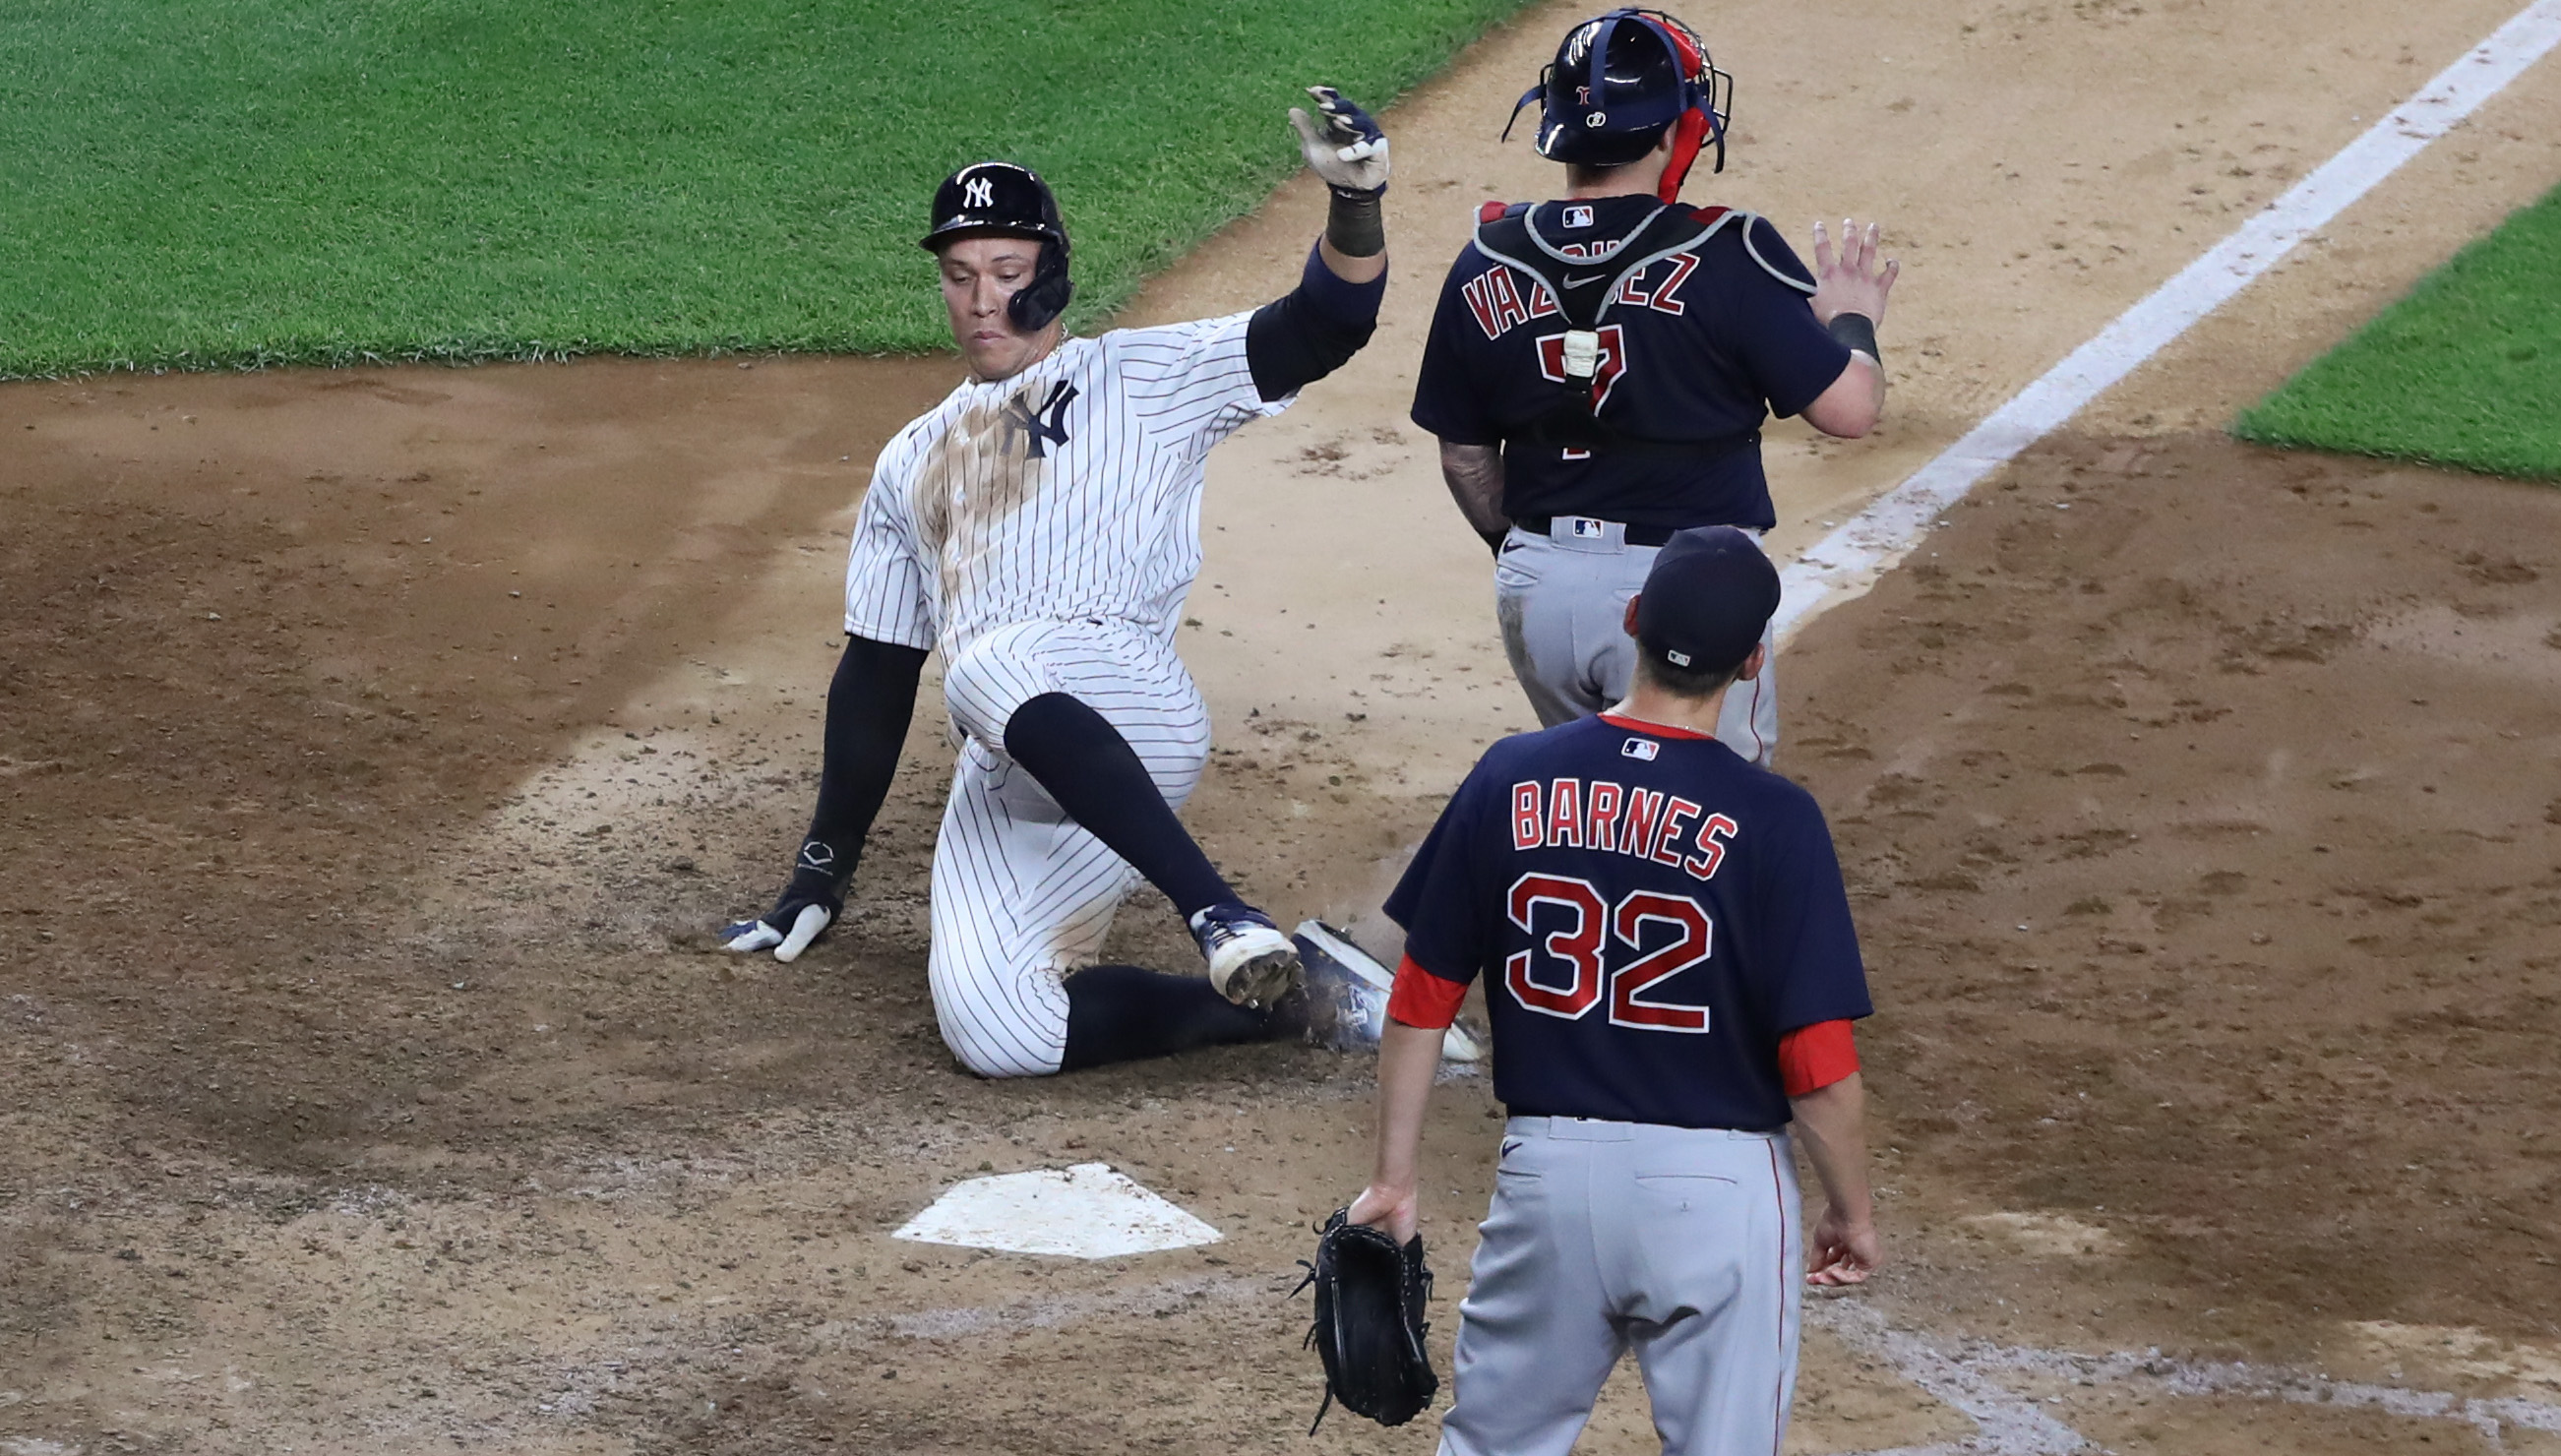 Red Sox vs. Yankees MLB 2022 live stream (7/16) How to watch